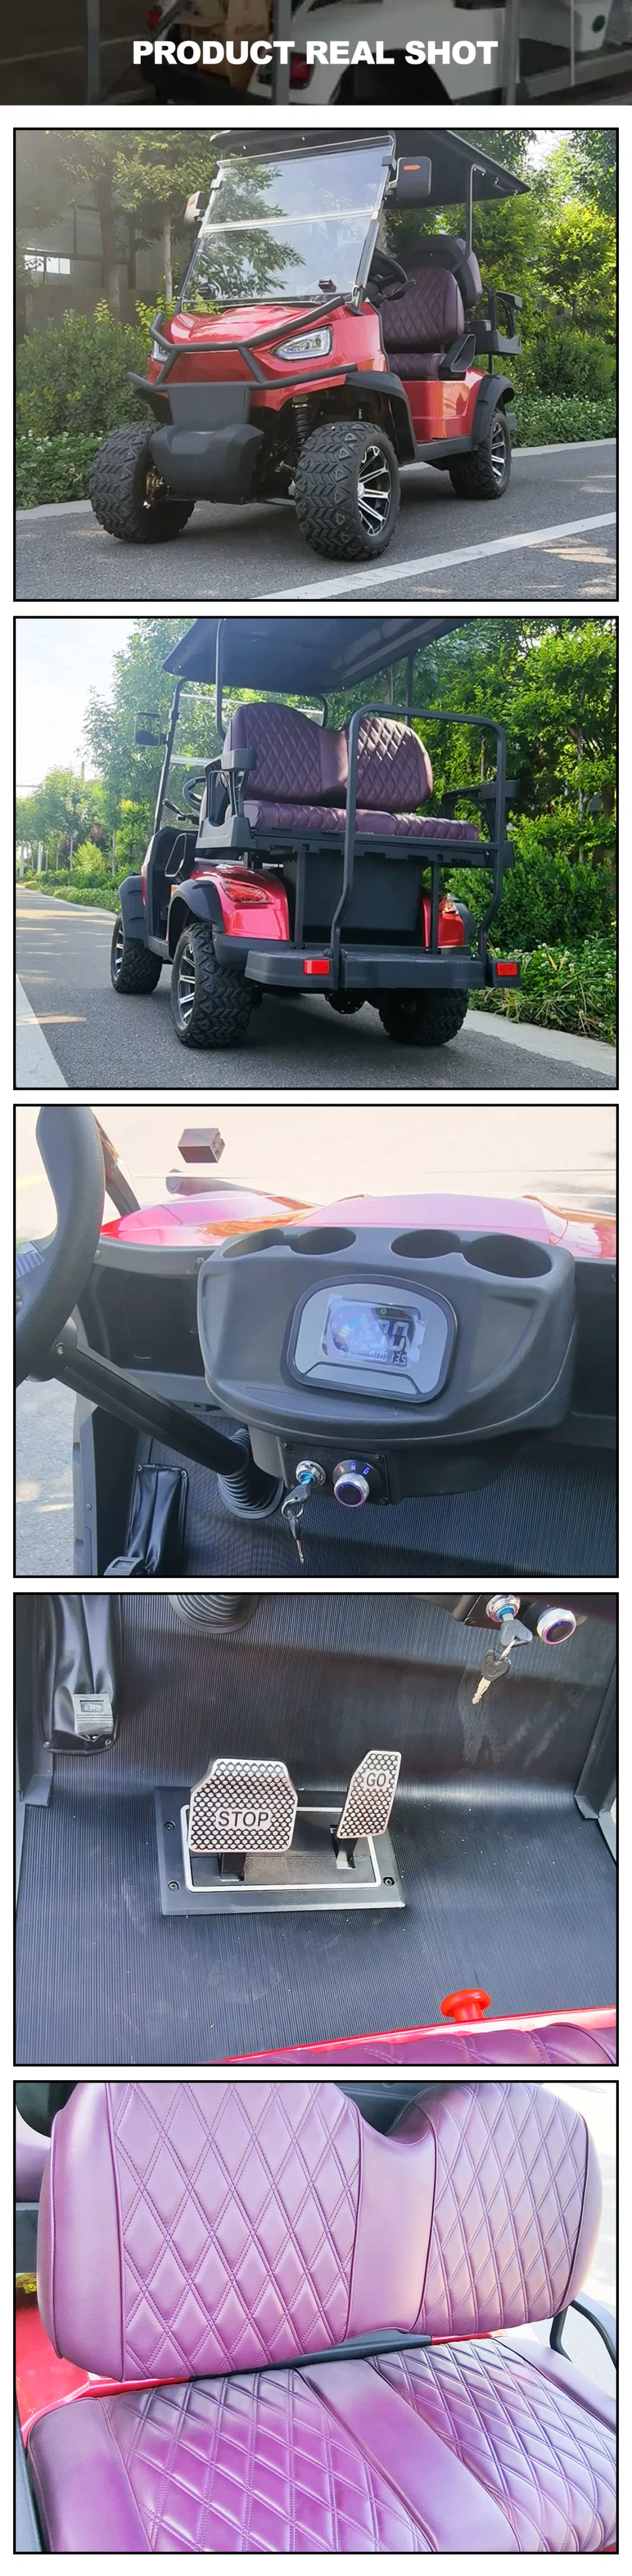 4 Seater Street Legal off Road Lsv ATV UTV Lifted Hunting Electric Pink Golf Cart